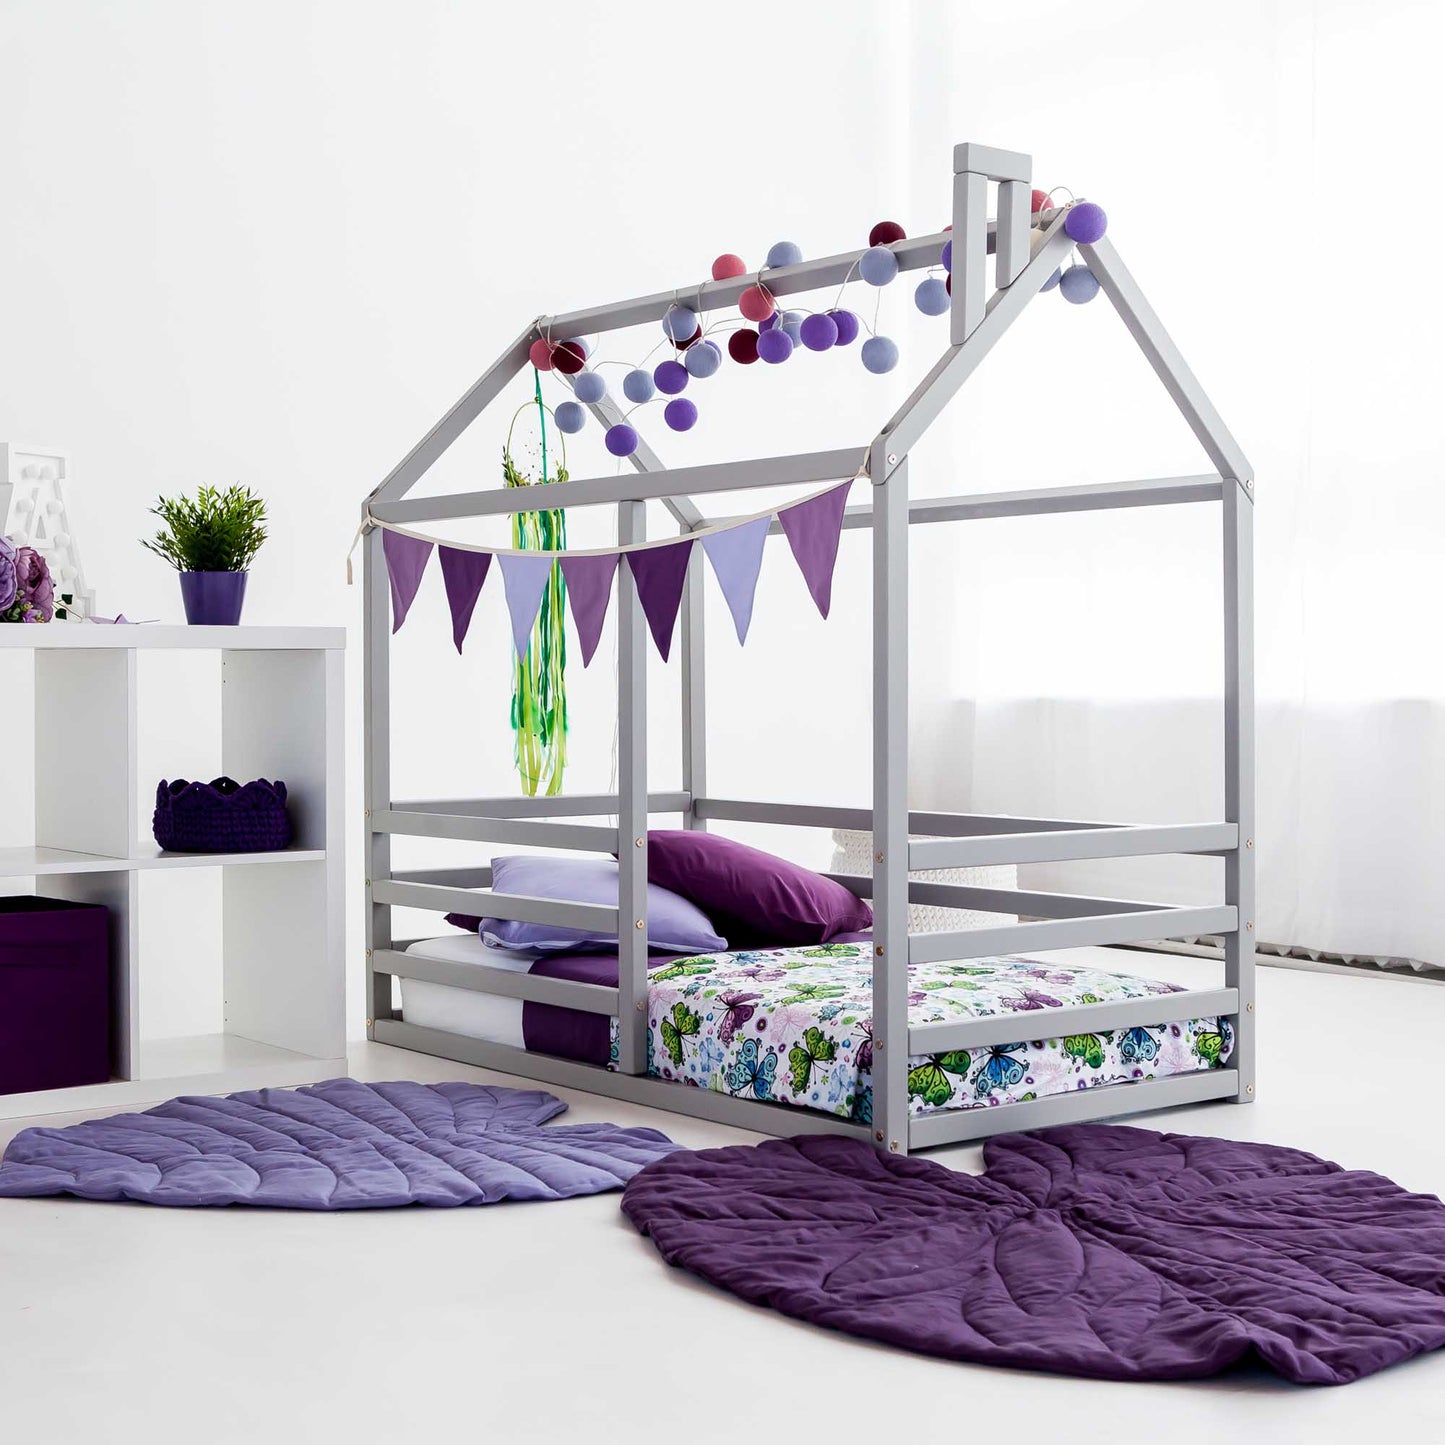 A child's room with a Floor level house bed with a horizontal fence and purple pillows.